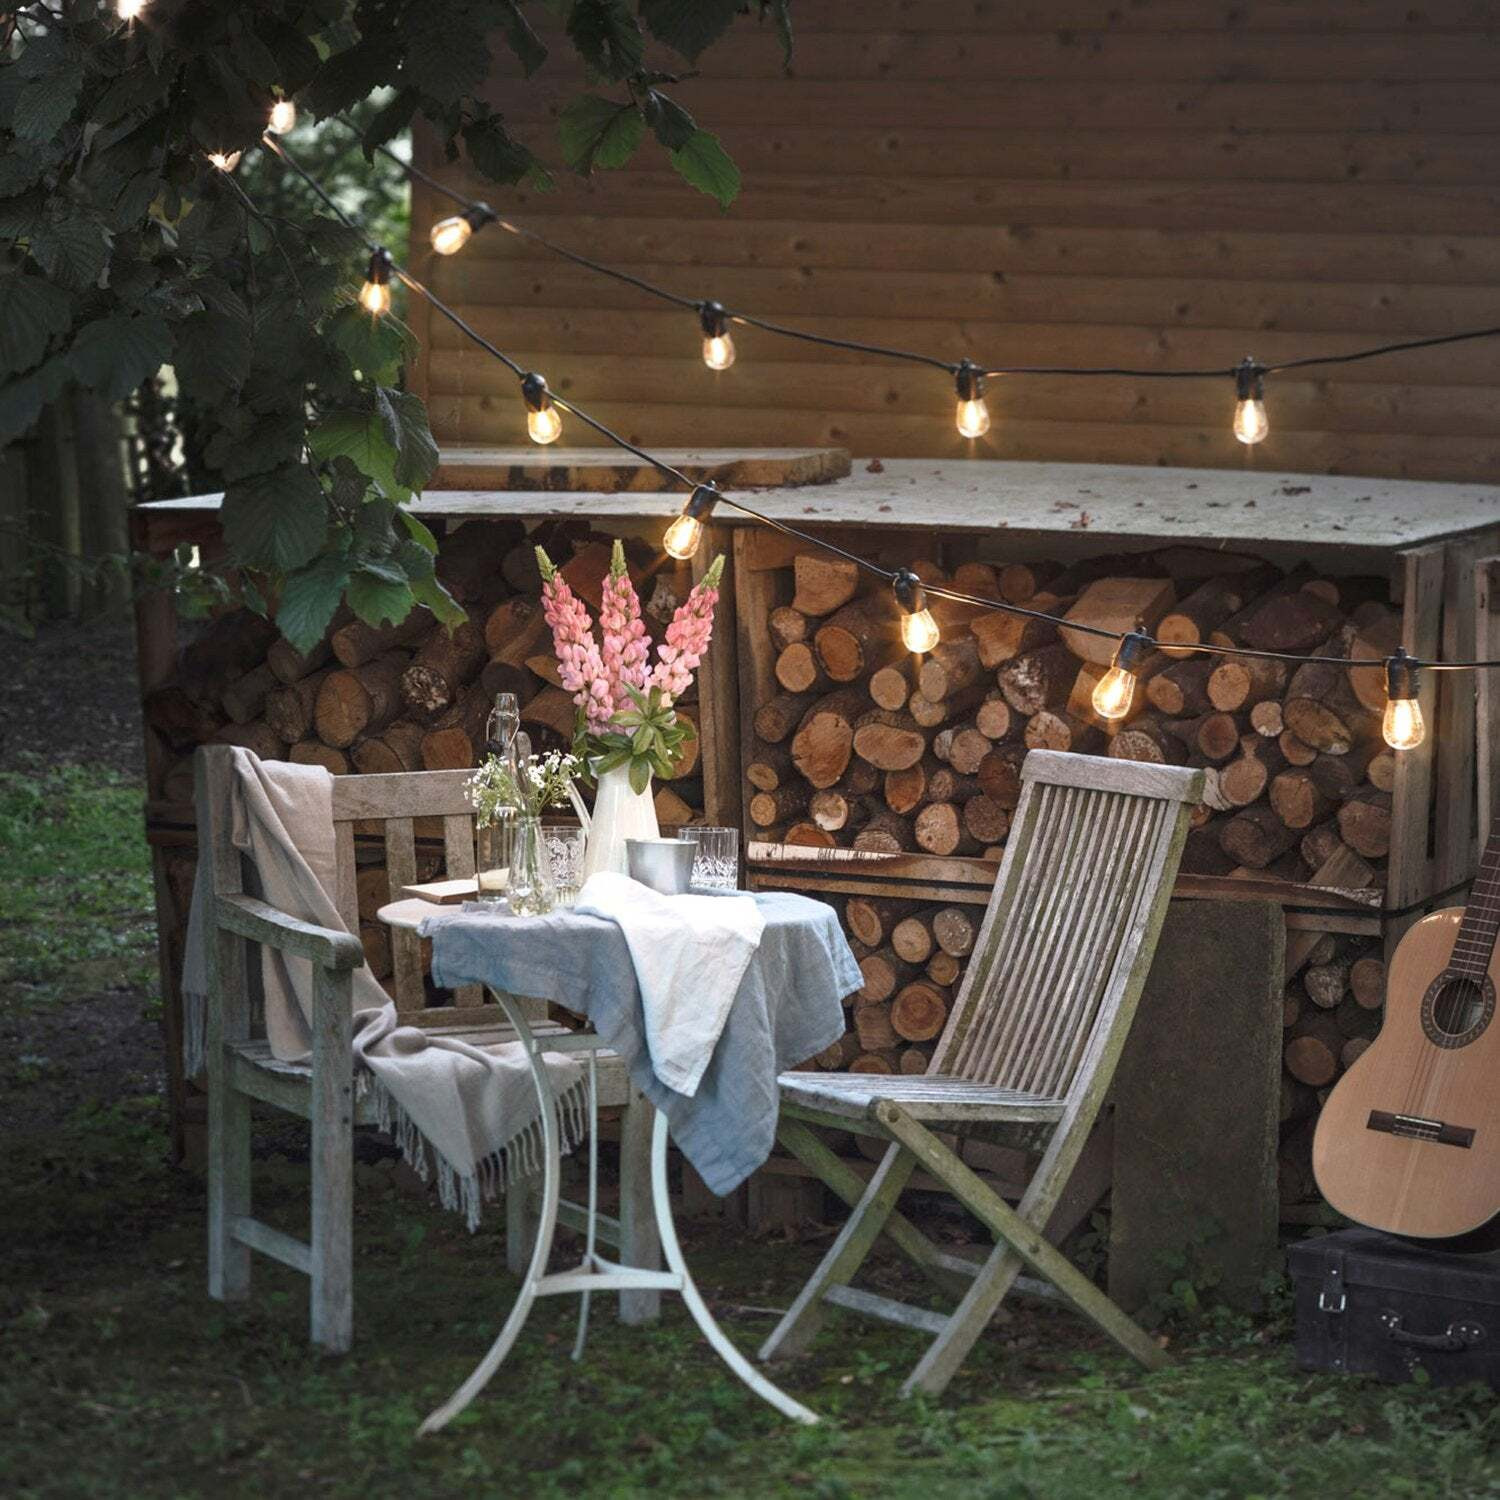 Ultimate Connect 75m 150 Warm White Festoon Lights Black Cable - image 1